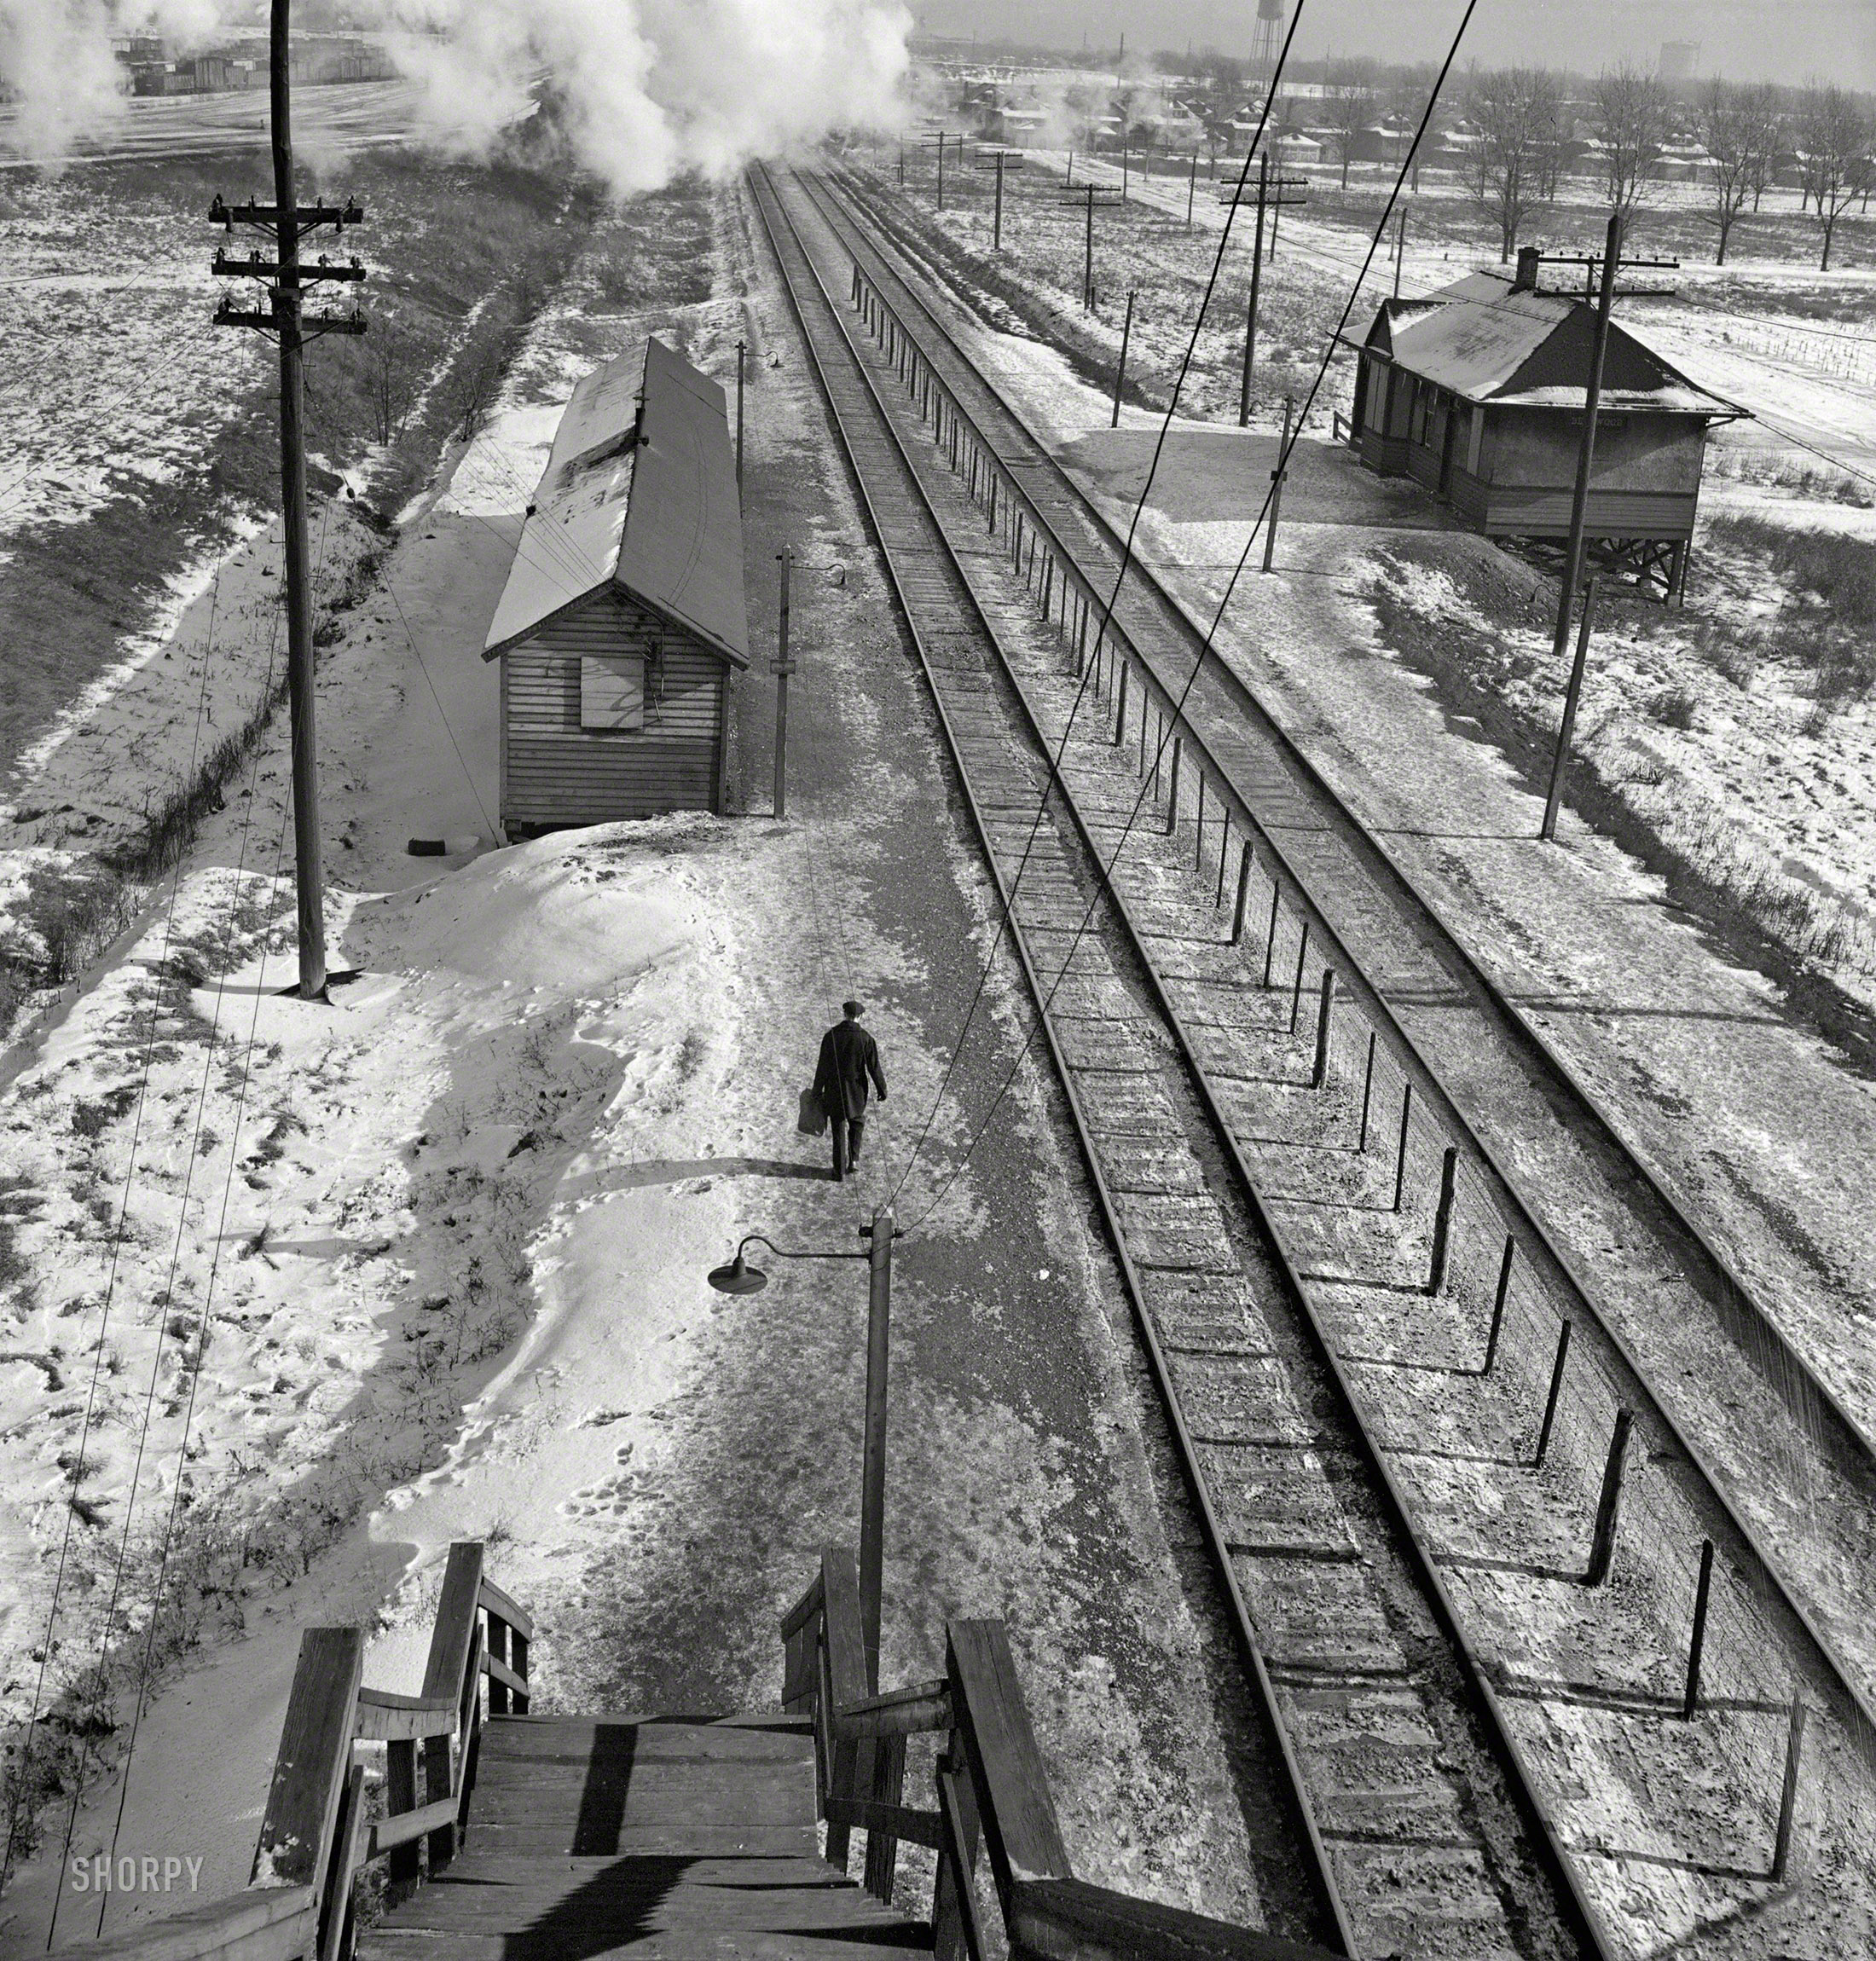 January 1943. "Freight operations on the Chicago & North Western R.R. between Chicago and Clinton, Iowa. The journey ended, conductor John M. Wolfsmith walks to the little passenger station to wait for a suburban train to take him home to Chicago." Photo by Jack Delano, Office of War Information. View full size.